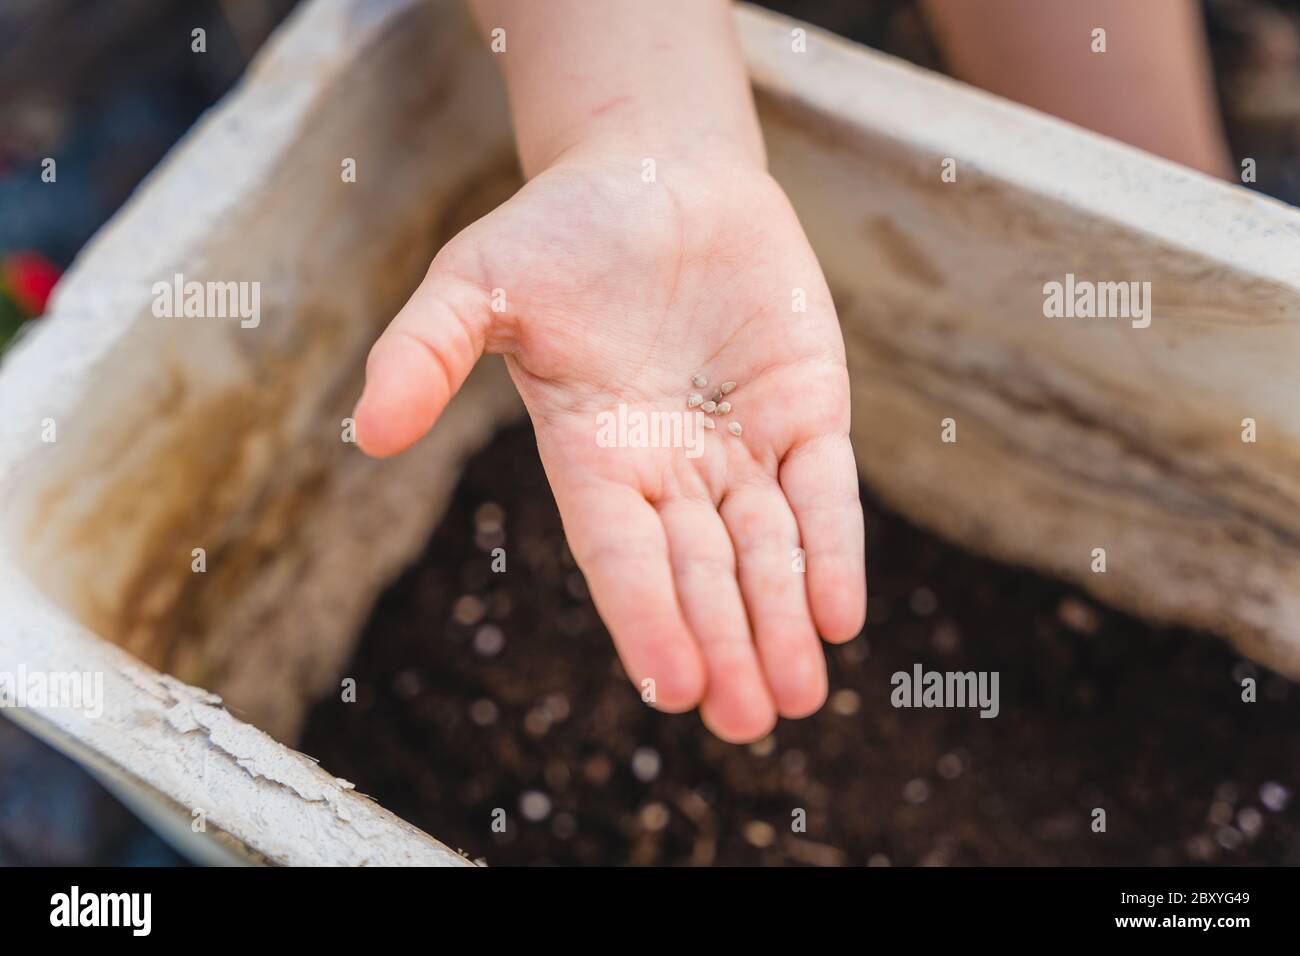 close up of a child hand holding few seeds with background blur of white clay pot, garden plants in backyard Stock Photo